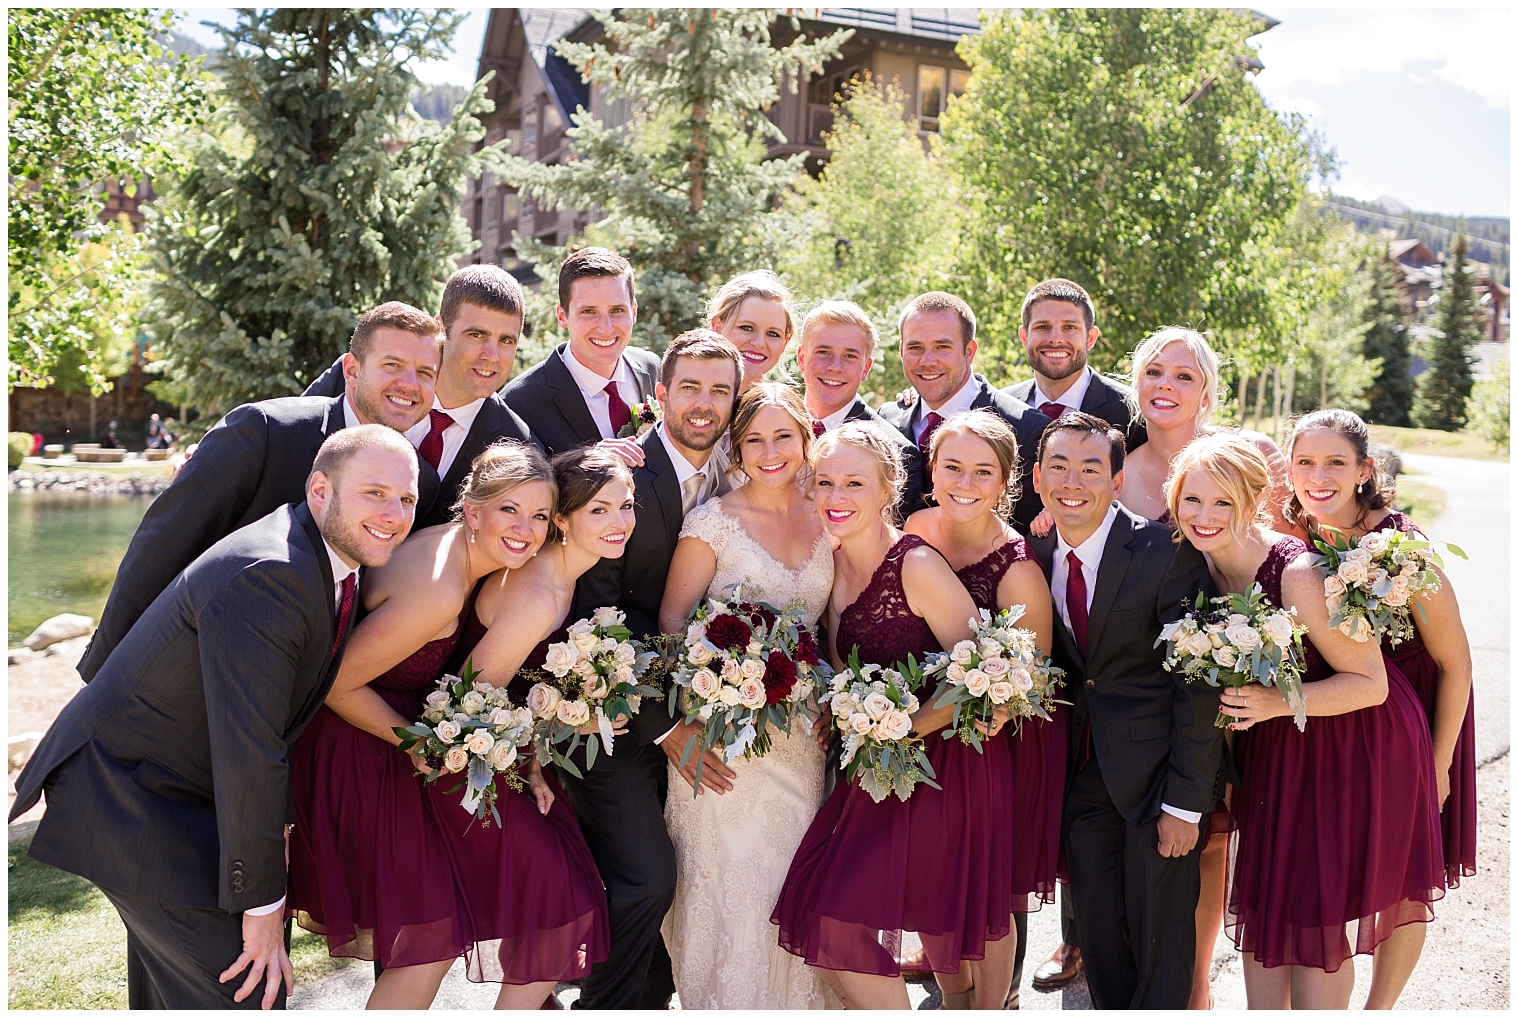 The bridal party poses for a photo at a Copper Mountain wedding.